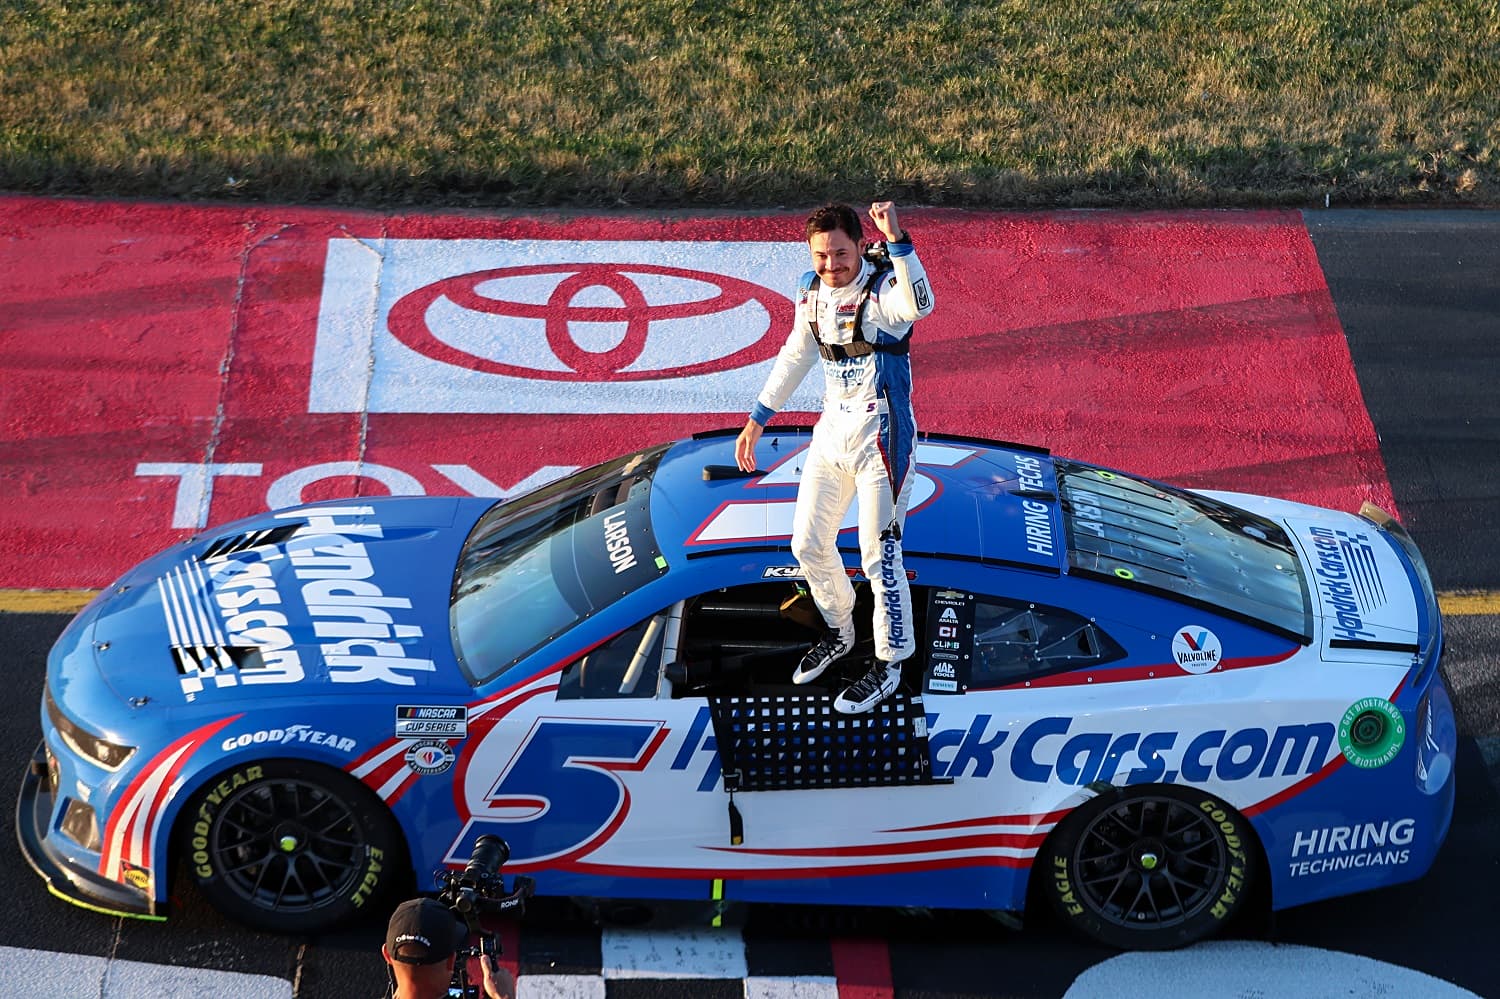 Kyle Larson, driver of the No. 5 HendrickCars.com Chevrolet, celebrates after winning the NASCAR Cup Series Toyota Owners 400 at Richmond Raceway on April 2, 2023. | David Jensen/Getty Images